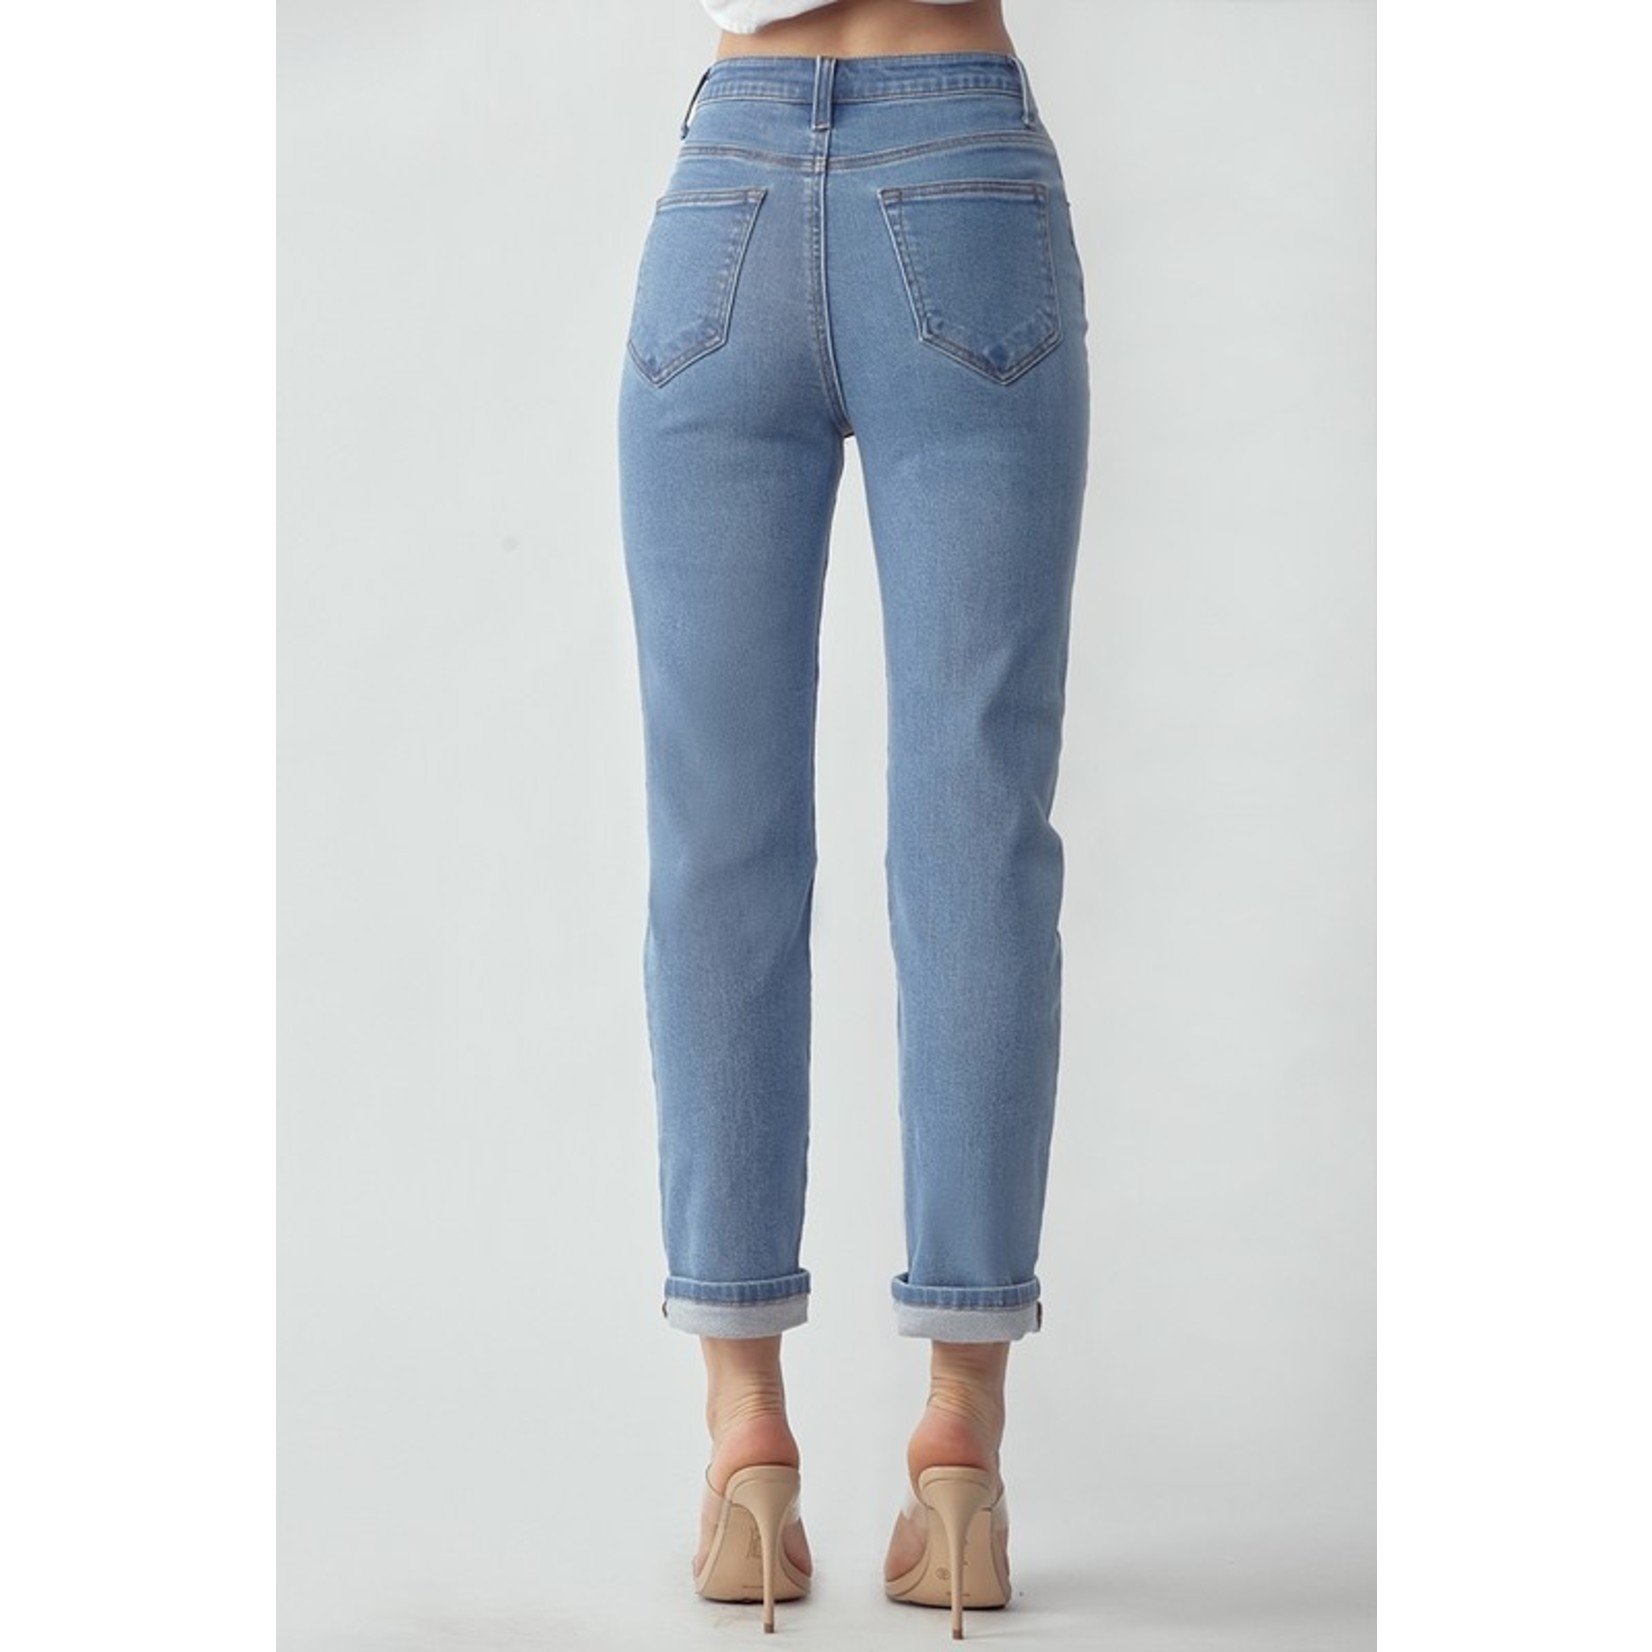 90s High Rise Mom Jeans